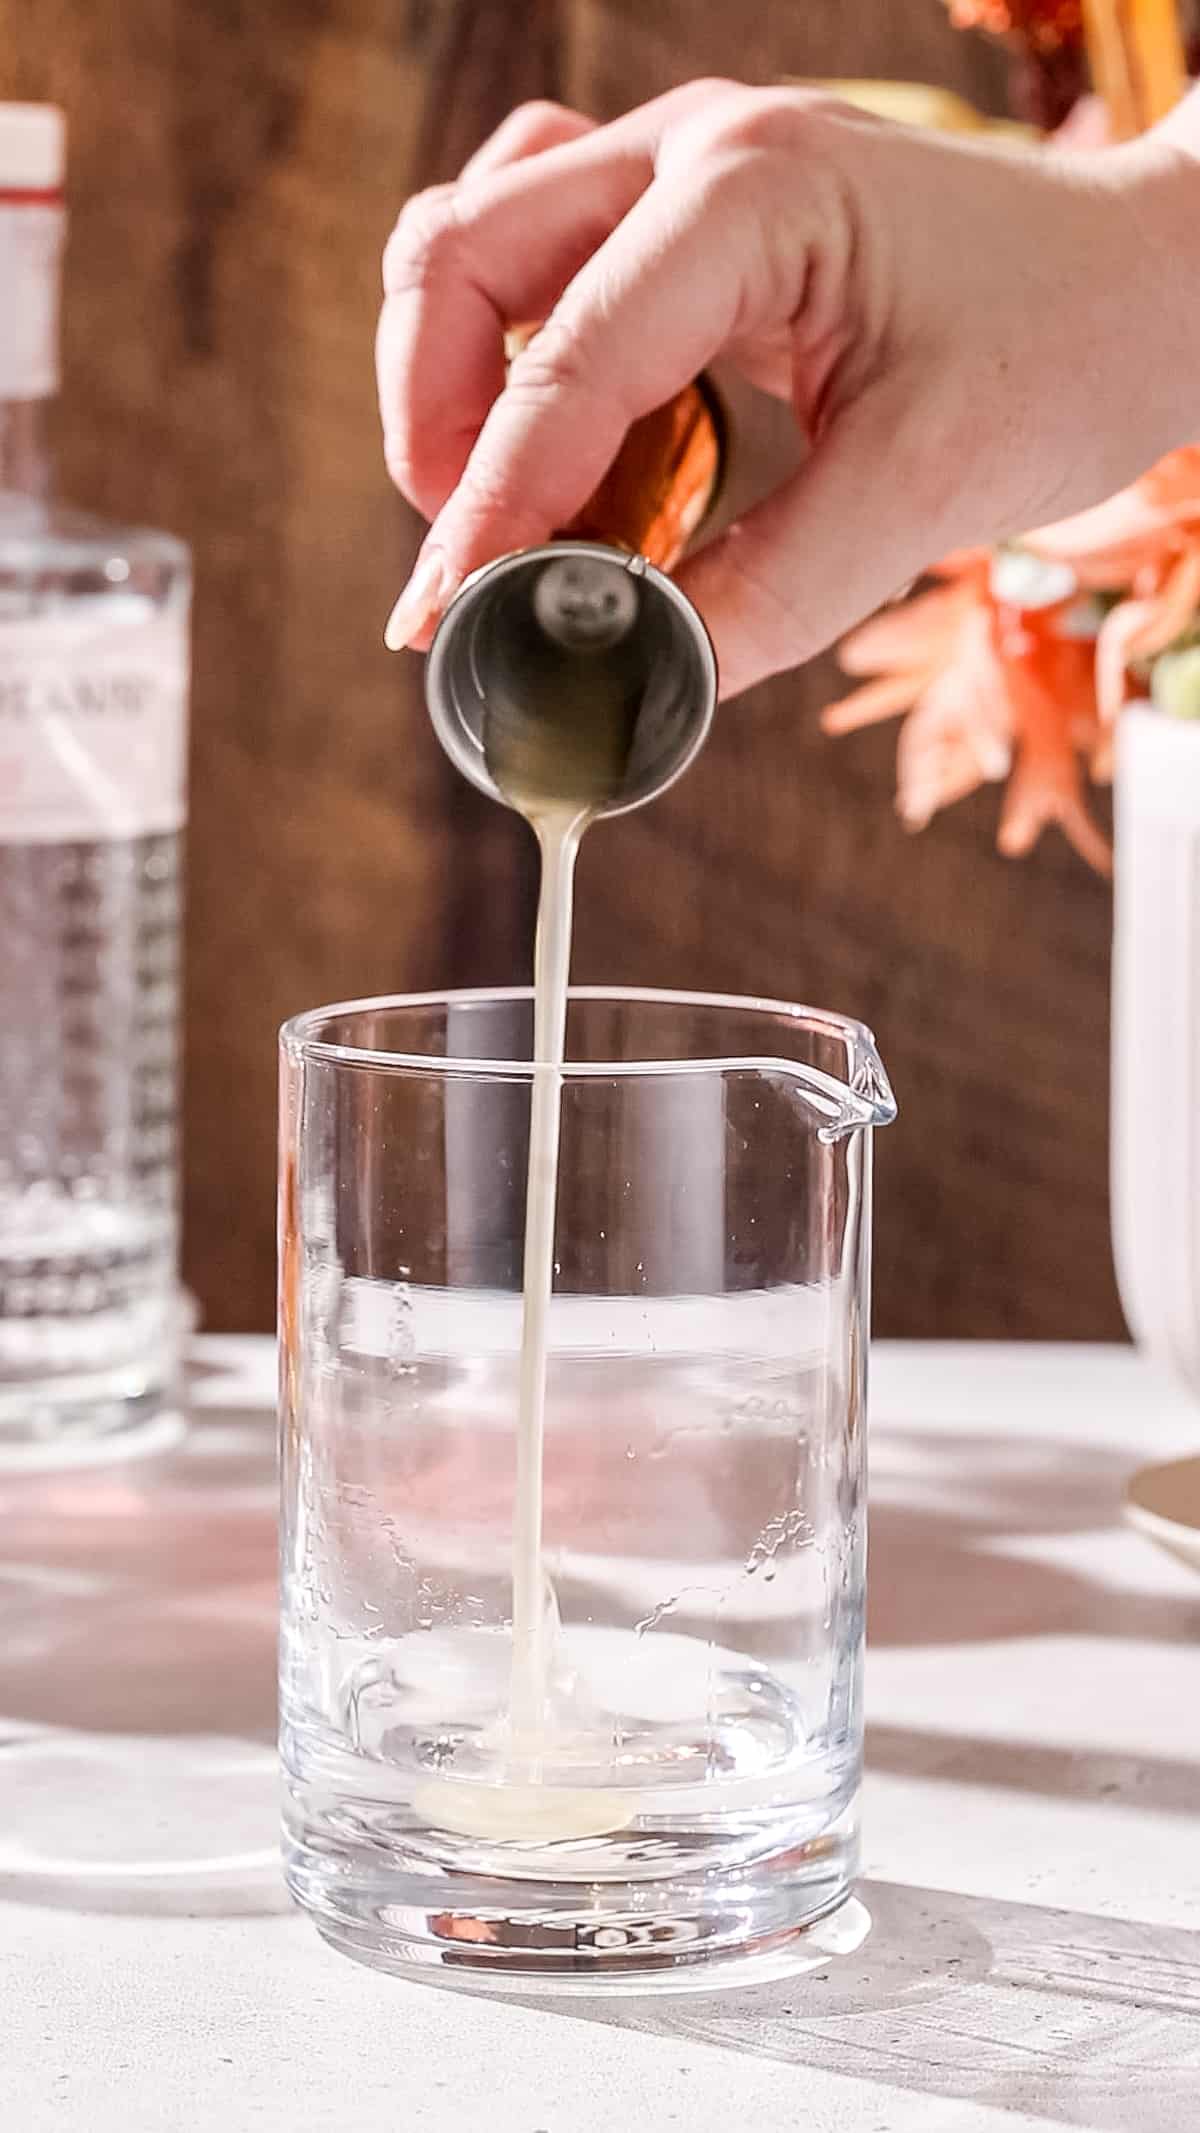 Hand pouring lychee puree syrup into a cocktail mixing glass.